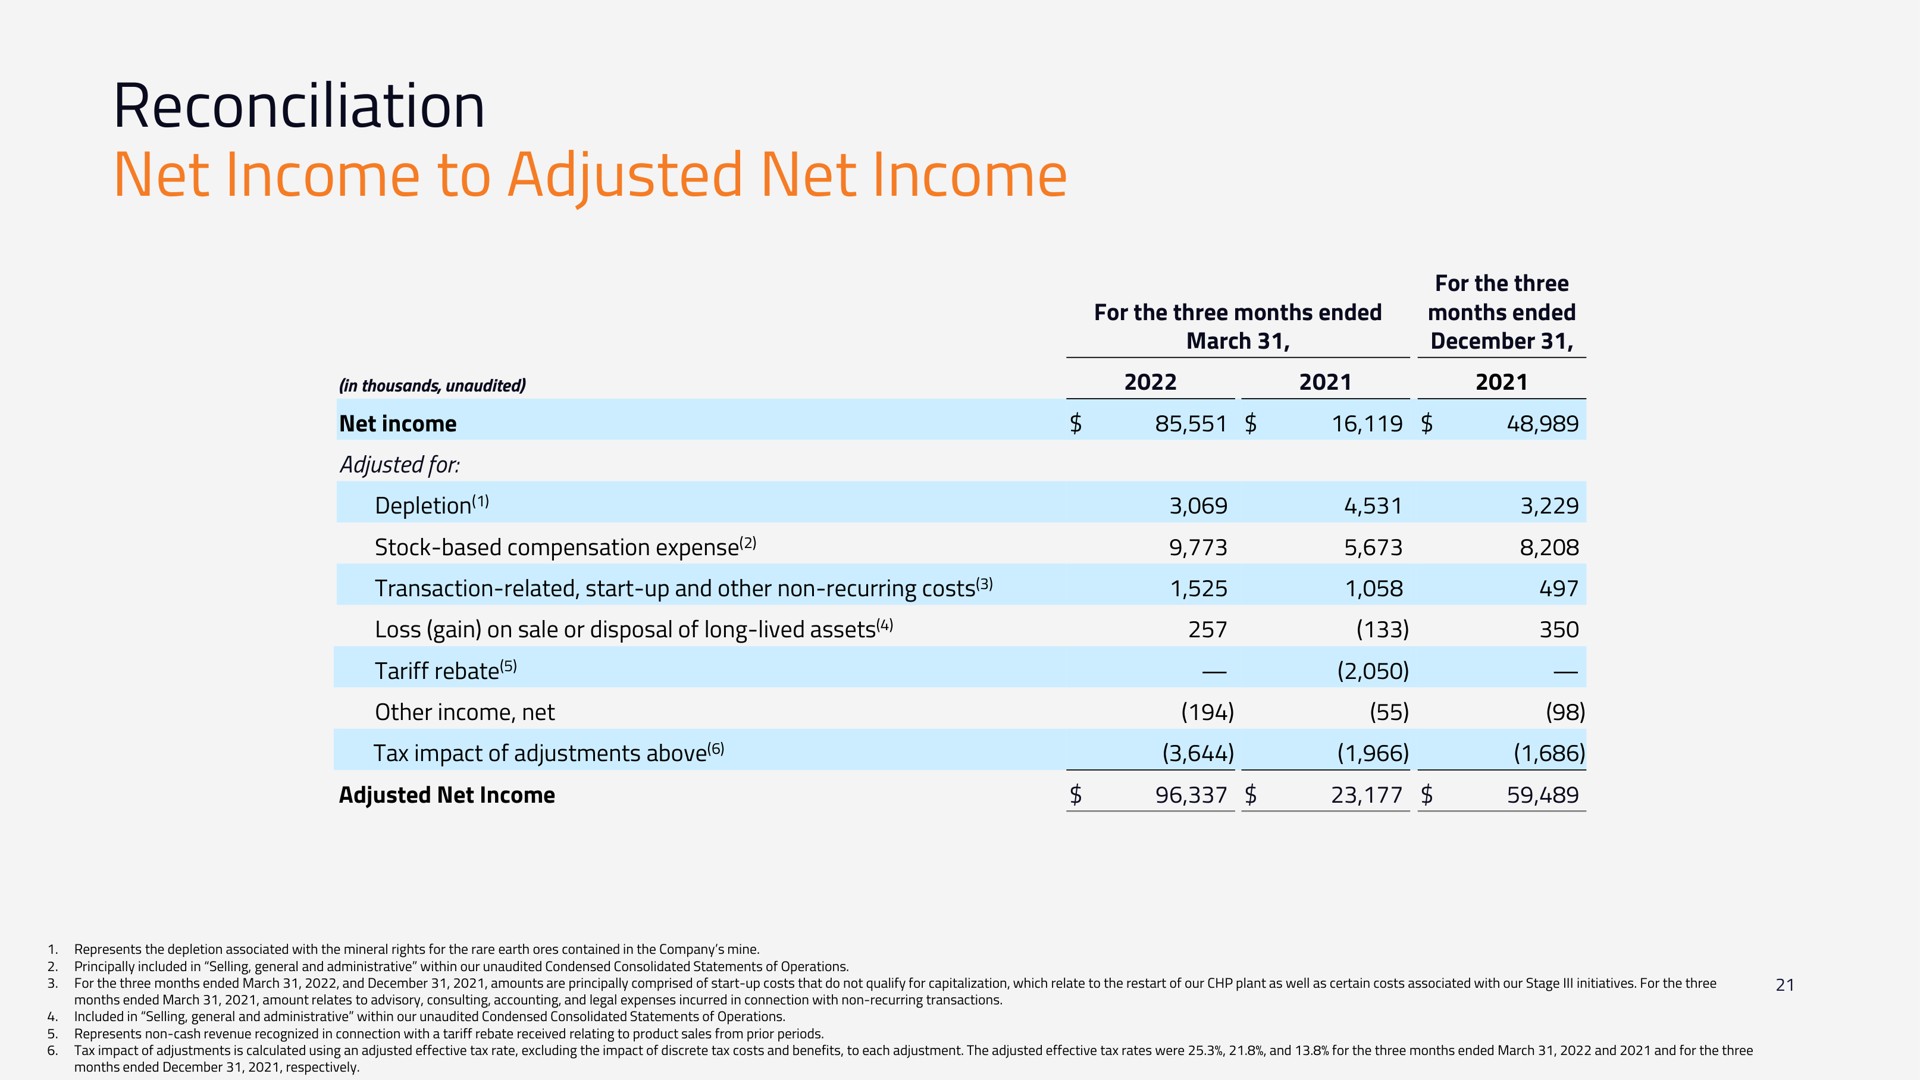 reconciliation net income to adjusted net income | MP Materials